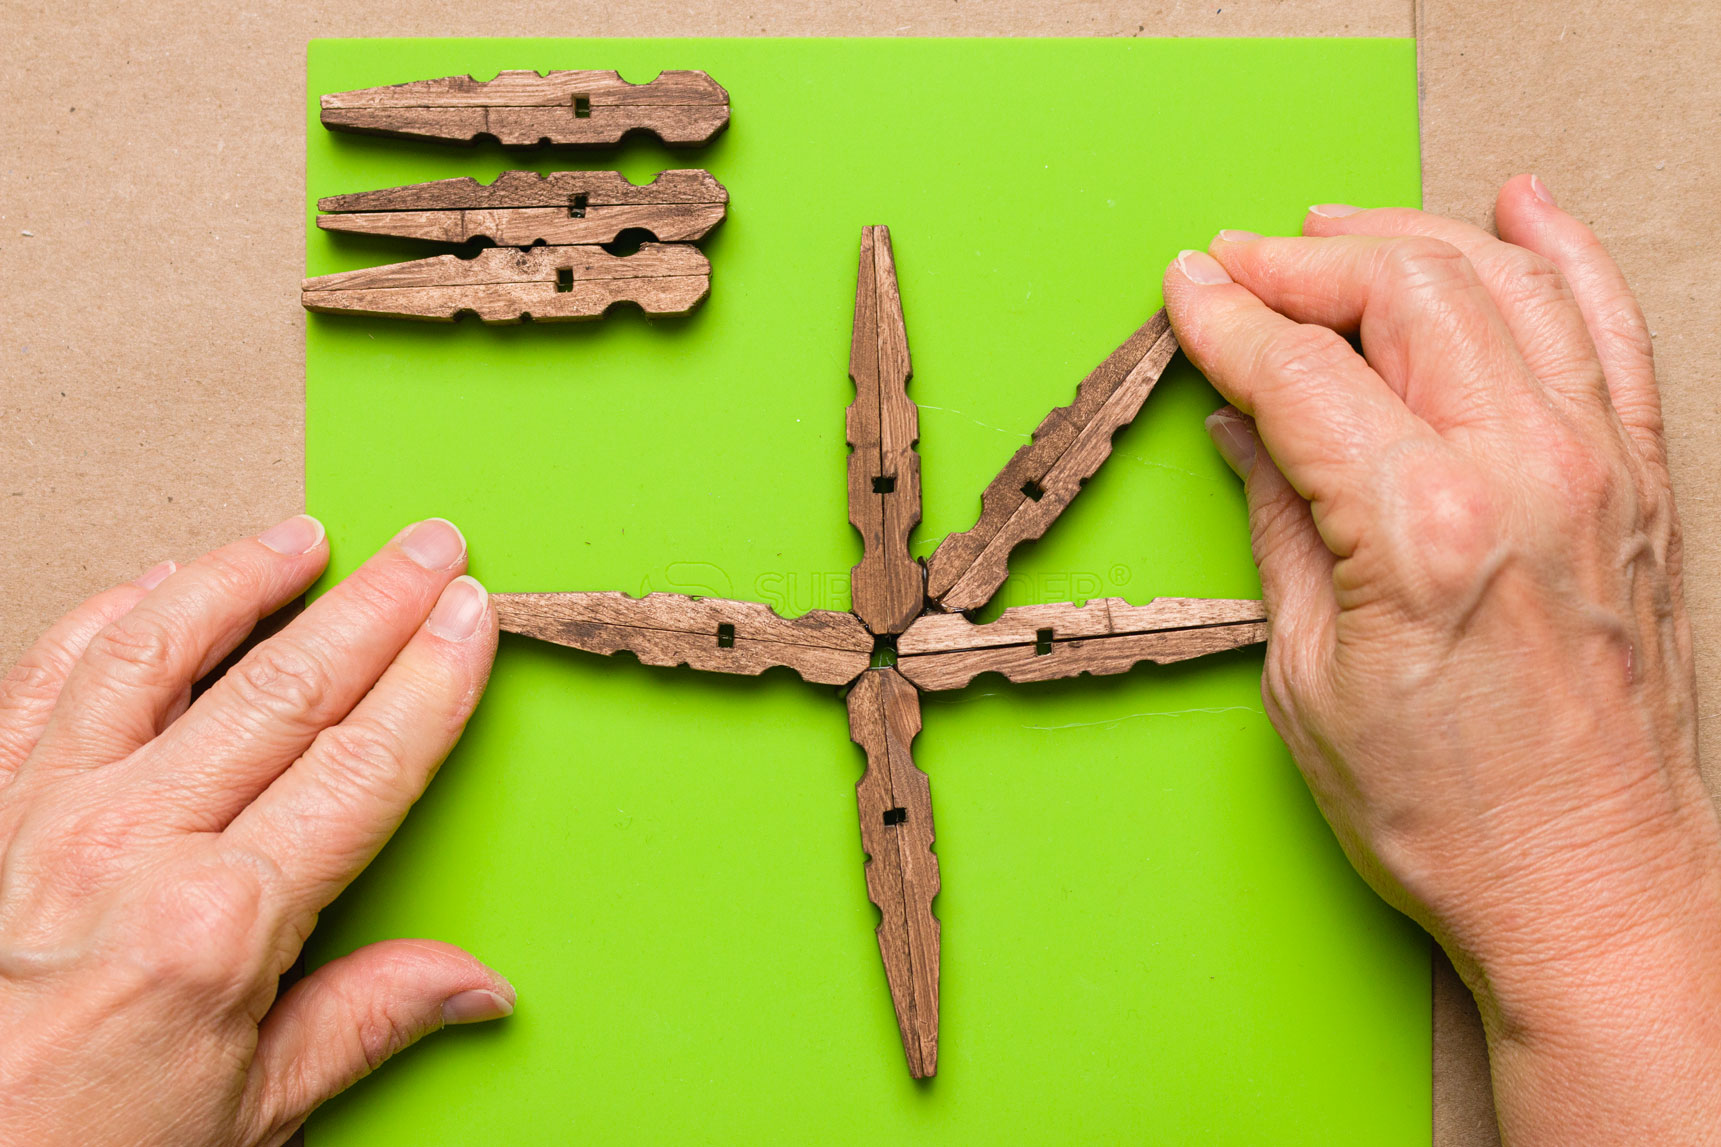 Gluing a clothespin pair between the clothespins in the cross formation 